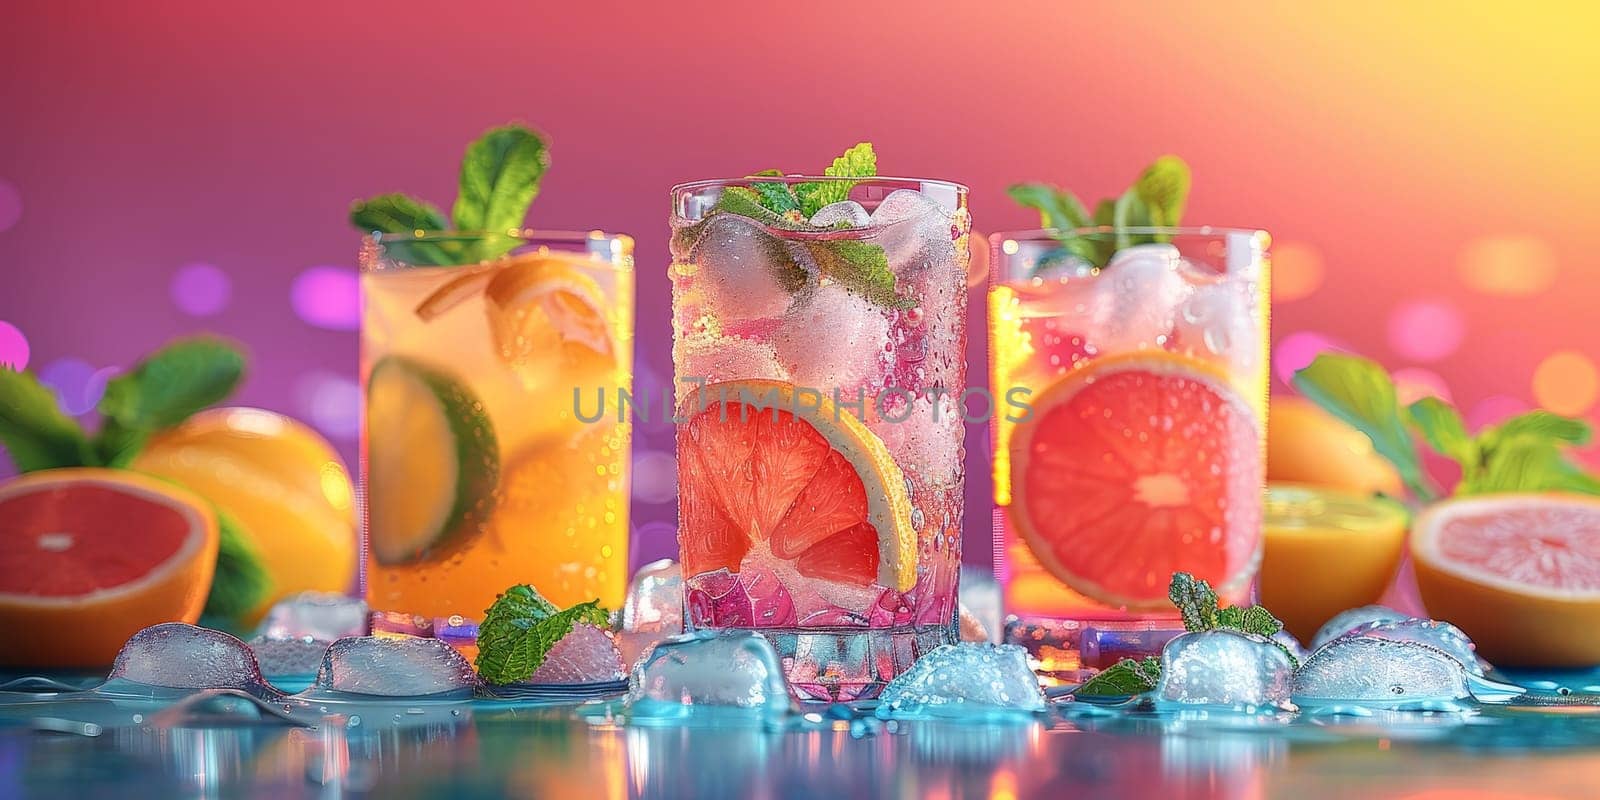 Three glasses of fruit punch with ice cubes and garnishes on a table